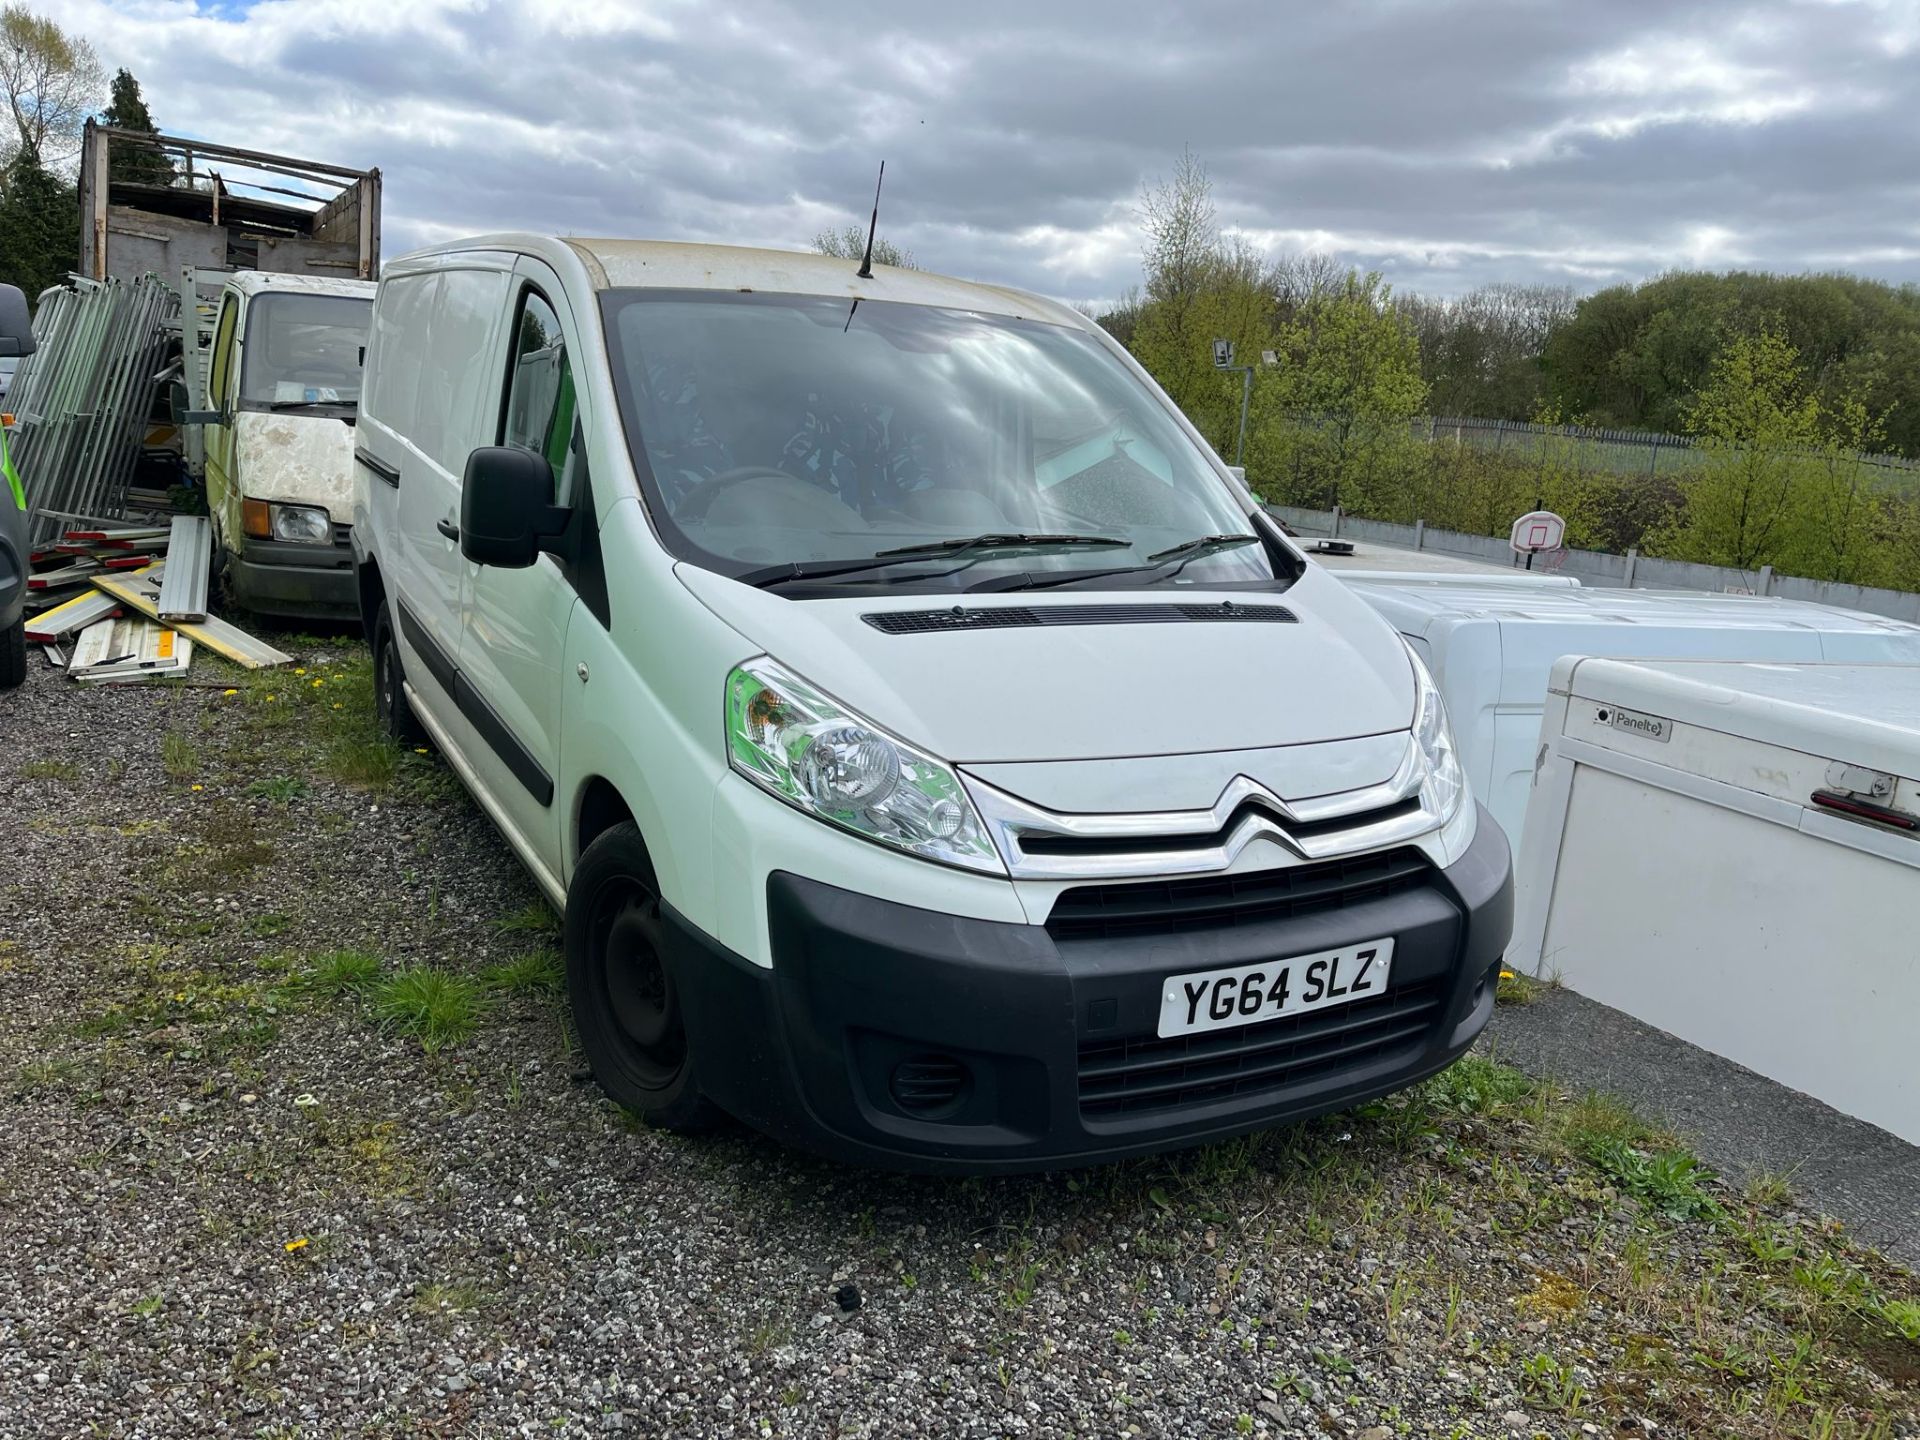 >>>SPECIAL CLEARANCE<<< 2014 CITROEN DISPATCH 1200 L2H1 ENTERPRISE 2.0 HDI - (NO VAT ON HAMMER) - Image 5 of 6